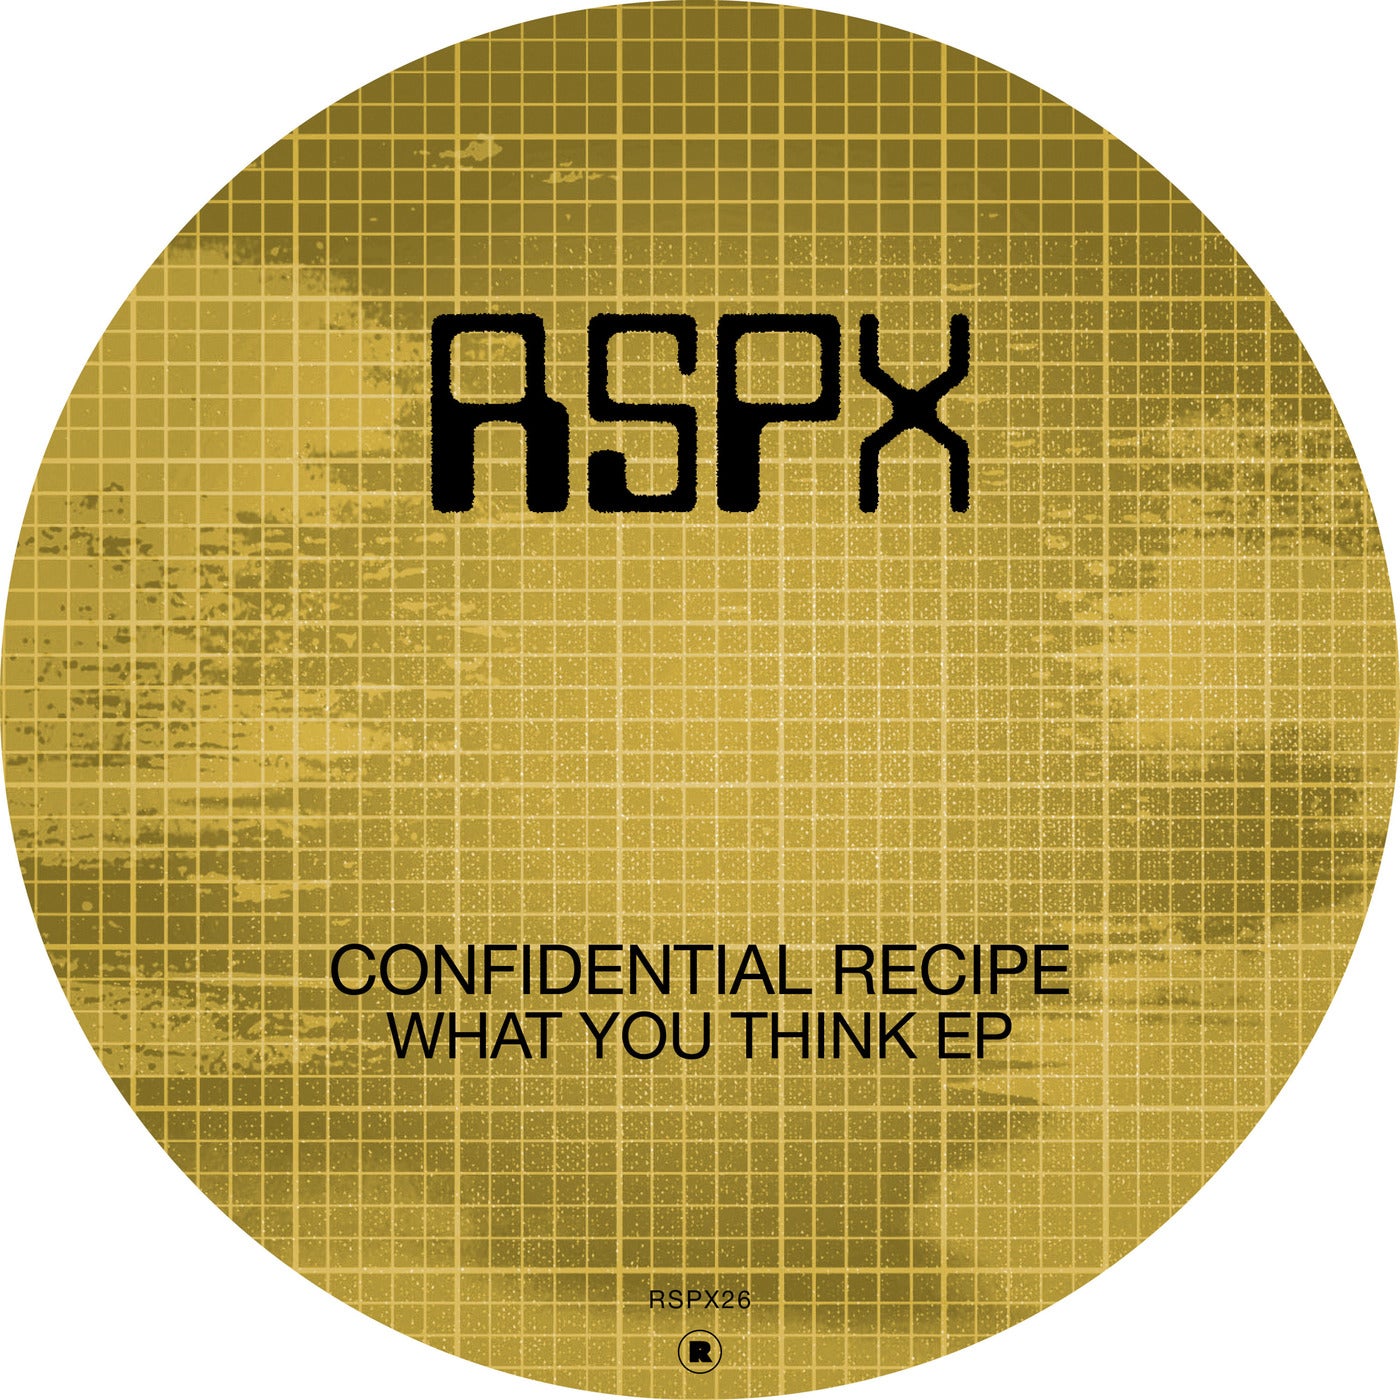 Confidential Recipe - What You Think EP [RSPX26]